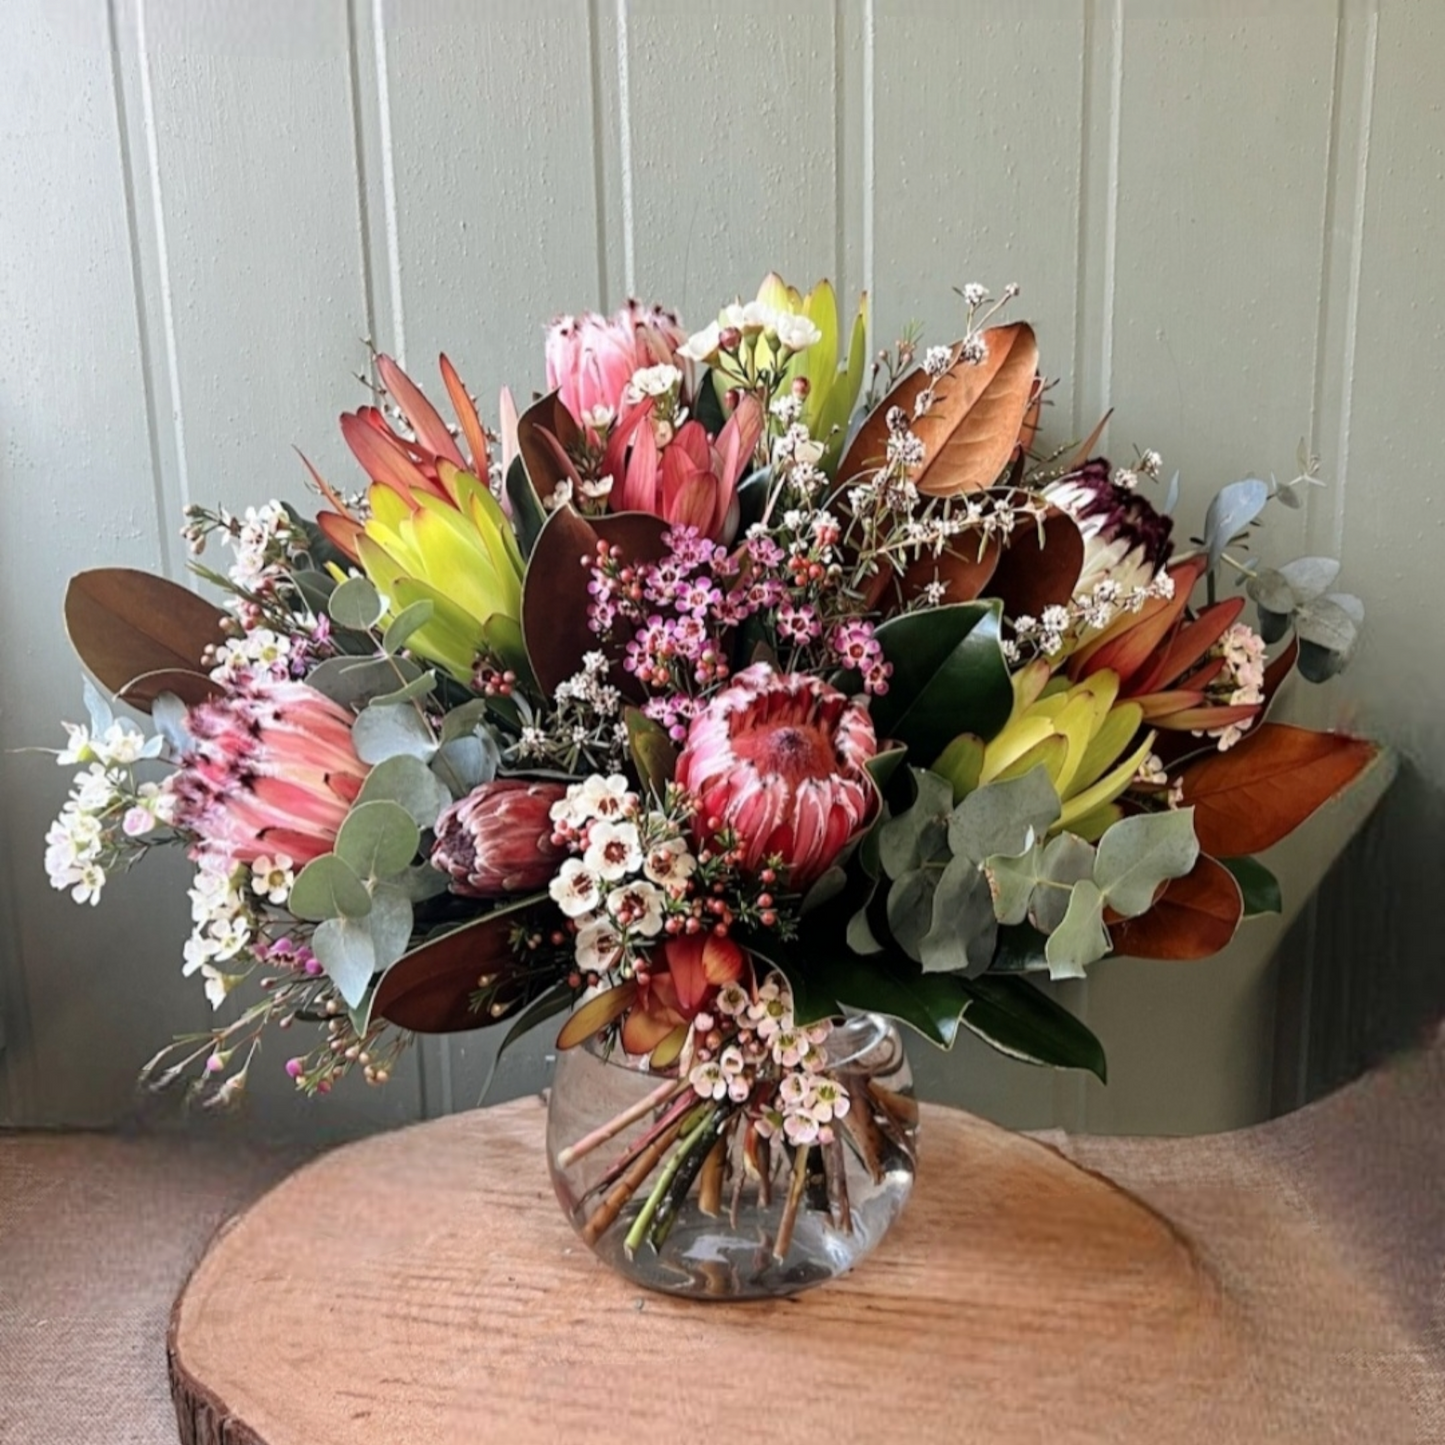 Seasonal mix of Australian native and wild flowers arranged in a vase